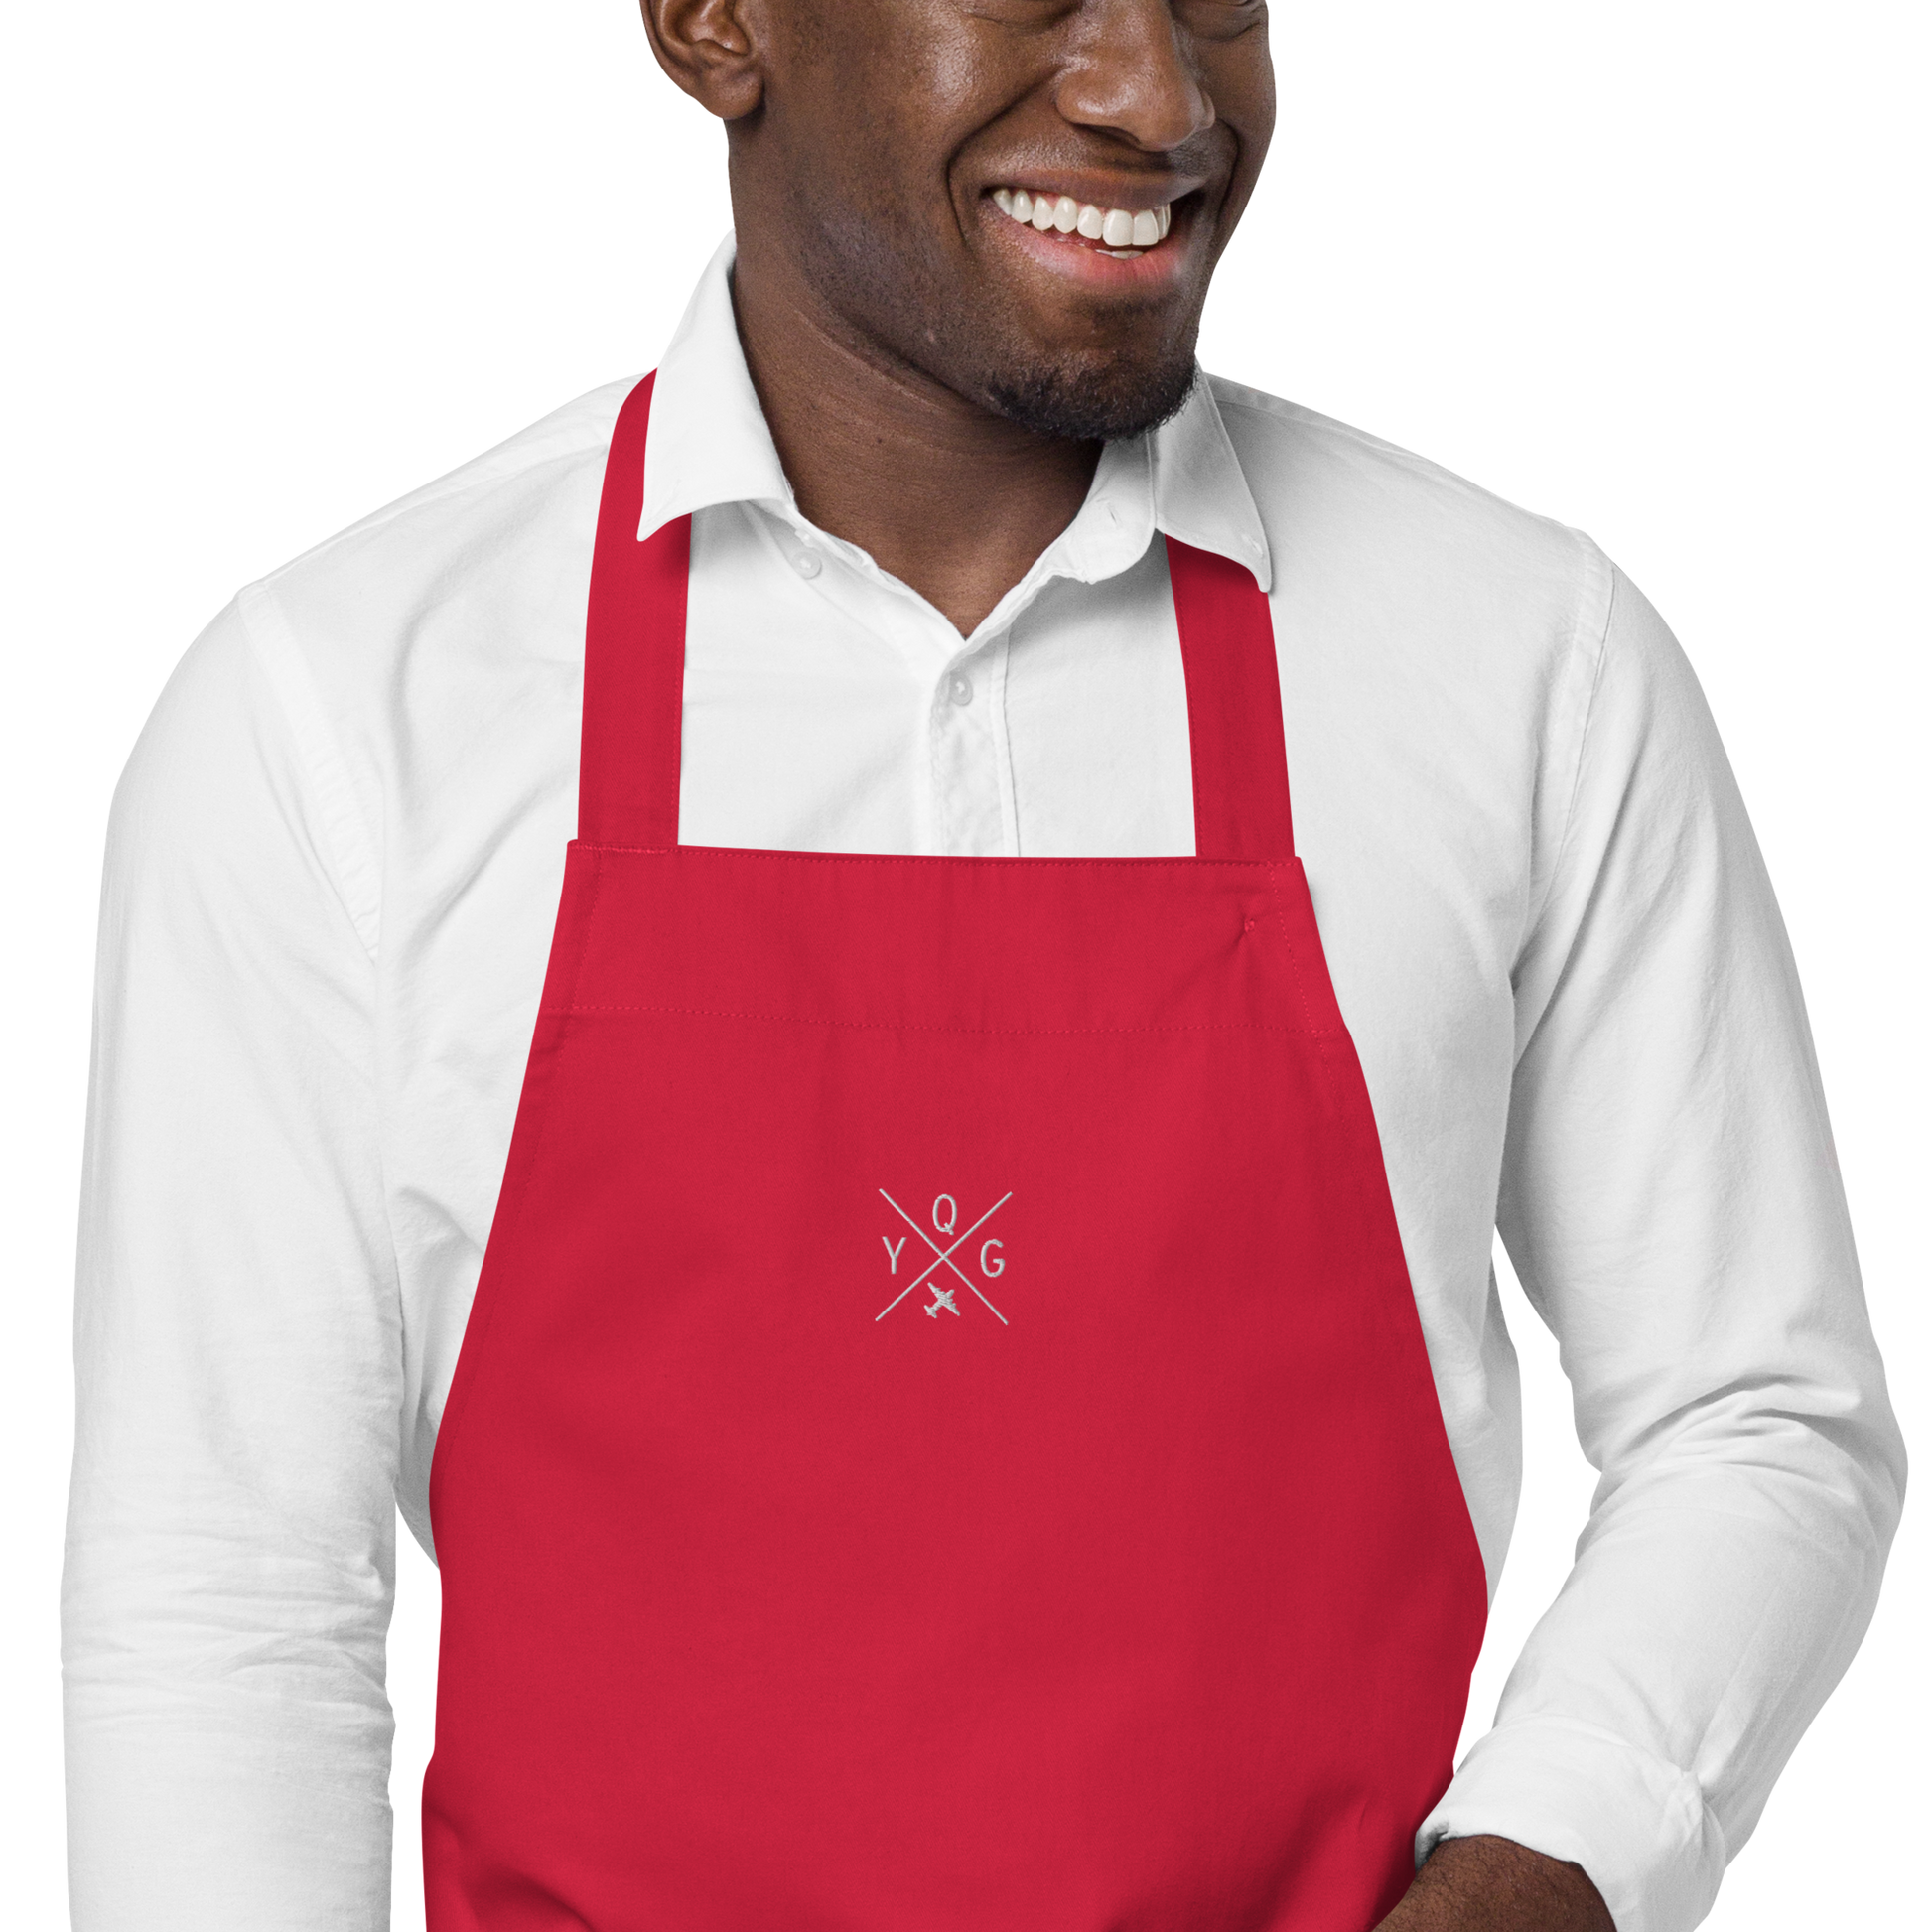 YHM Designs - YQG Windsor Organic Cotton Apron - Crossed-X Design with Airport Code and Vintage Propliner - White Embroidery - Image 02